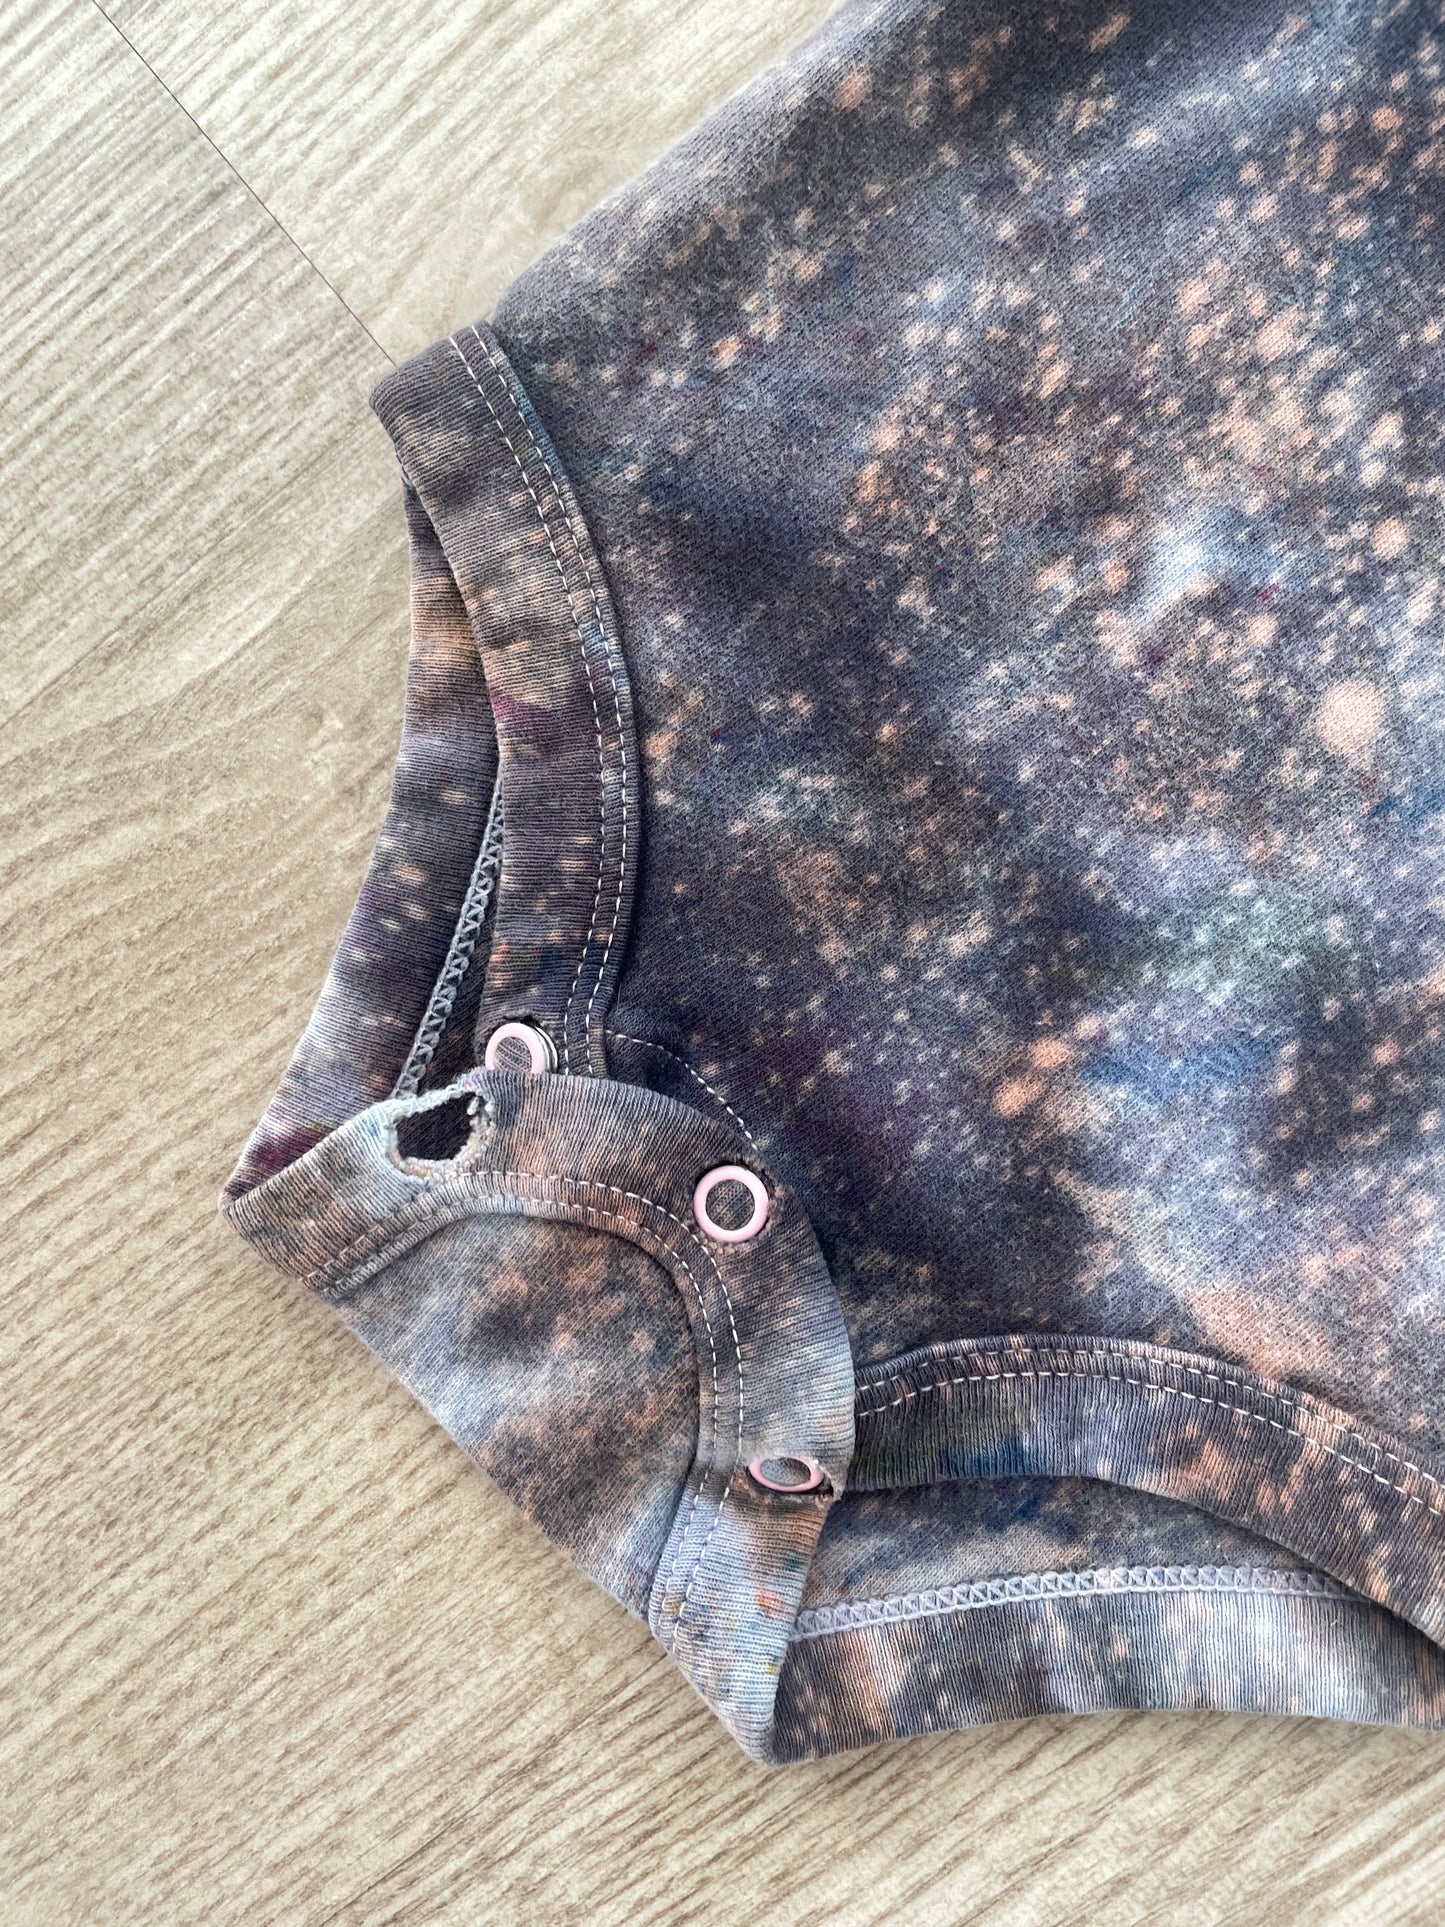 6-9 Months Climbing Shoe Short Sleeve Baby Onesie | Handmade, Upcycled Tie Dye Cotton Onesie | Galaxy Ice Dyed Gray and White Baby Clothing